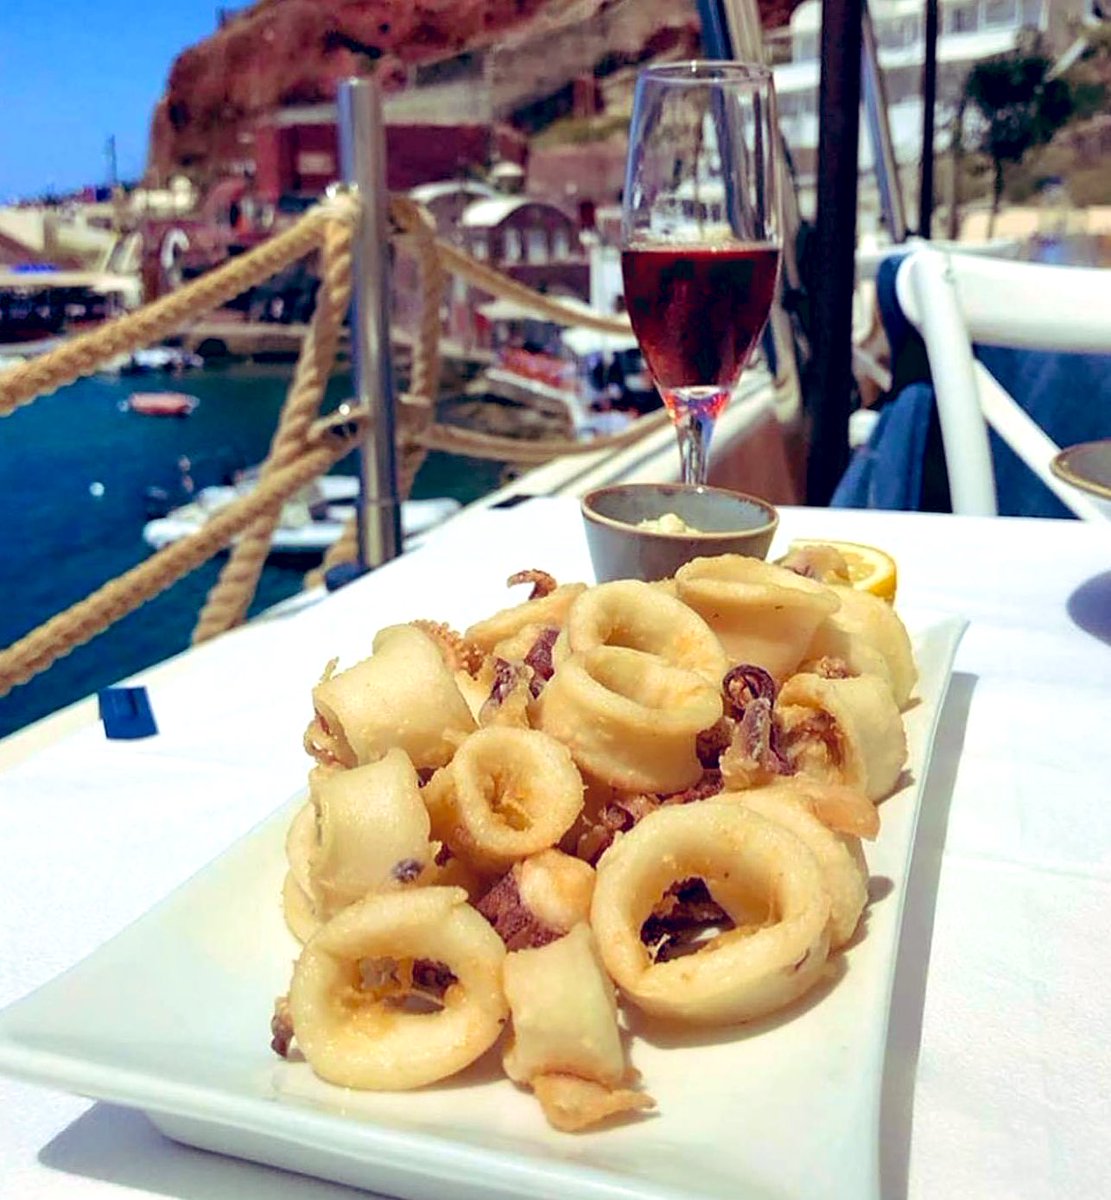 Now that’s what I’m talking about….🥰🇬🇷🥁 #Greece #MediterraneanDiet